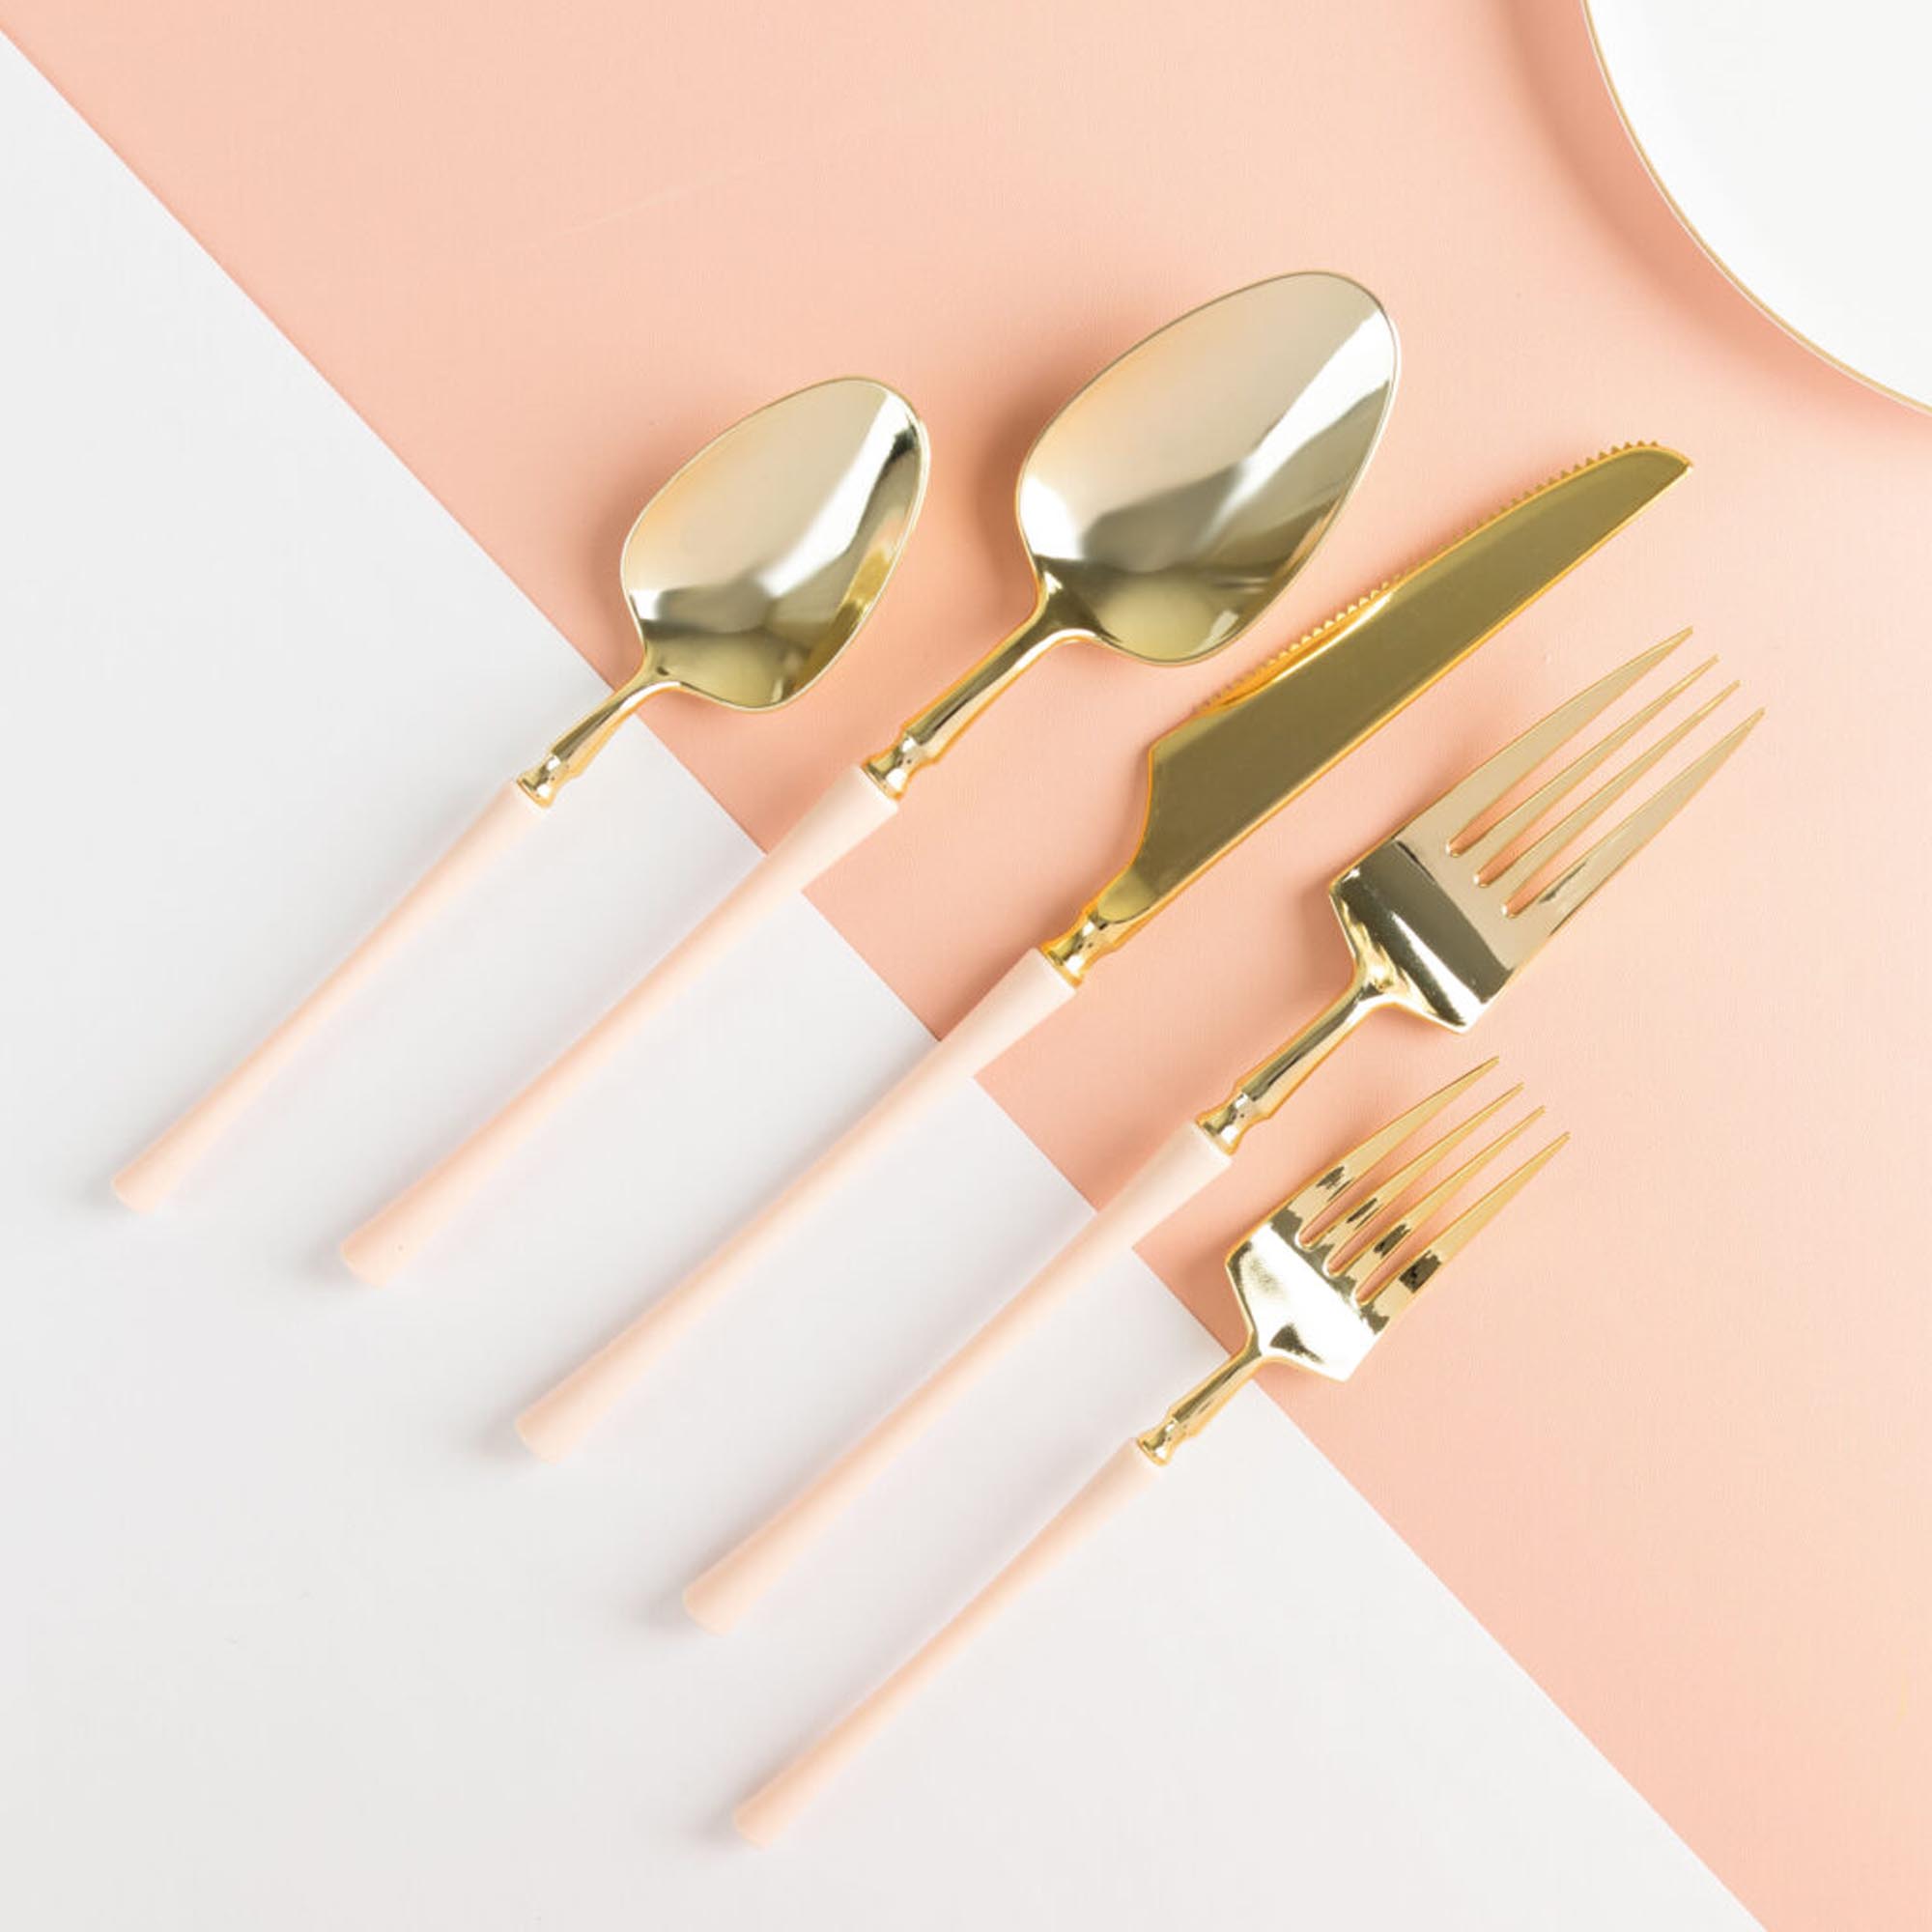 Plastic Party Household Supplies Disposable Plastic Bbq fancy disposable heavy duty classic elegant sturdy reusable wedding dinner dessert catering high quality birthday anniversary cutlery set